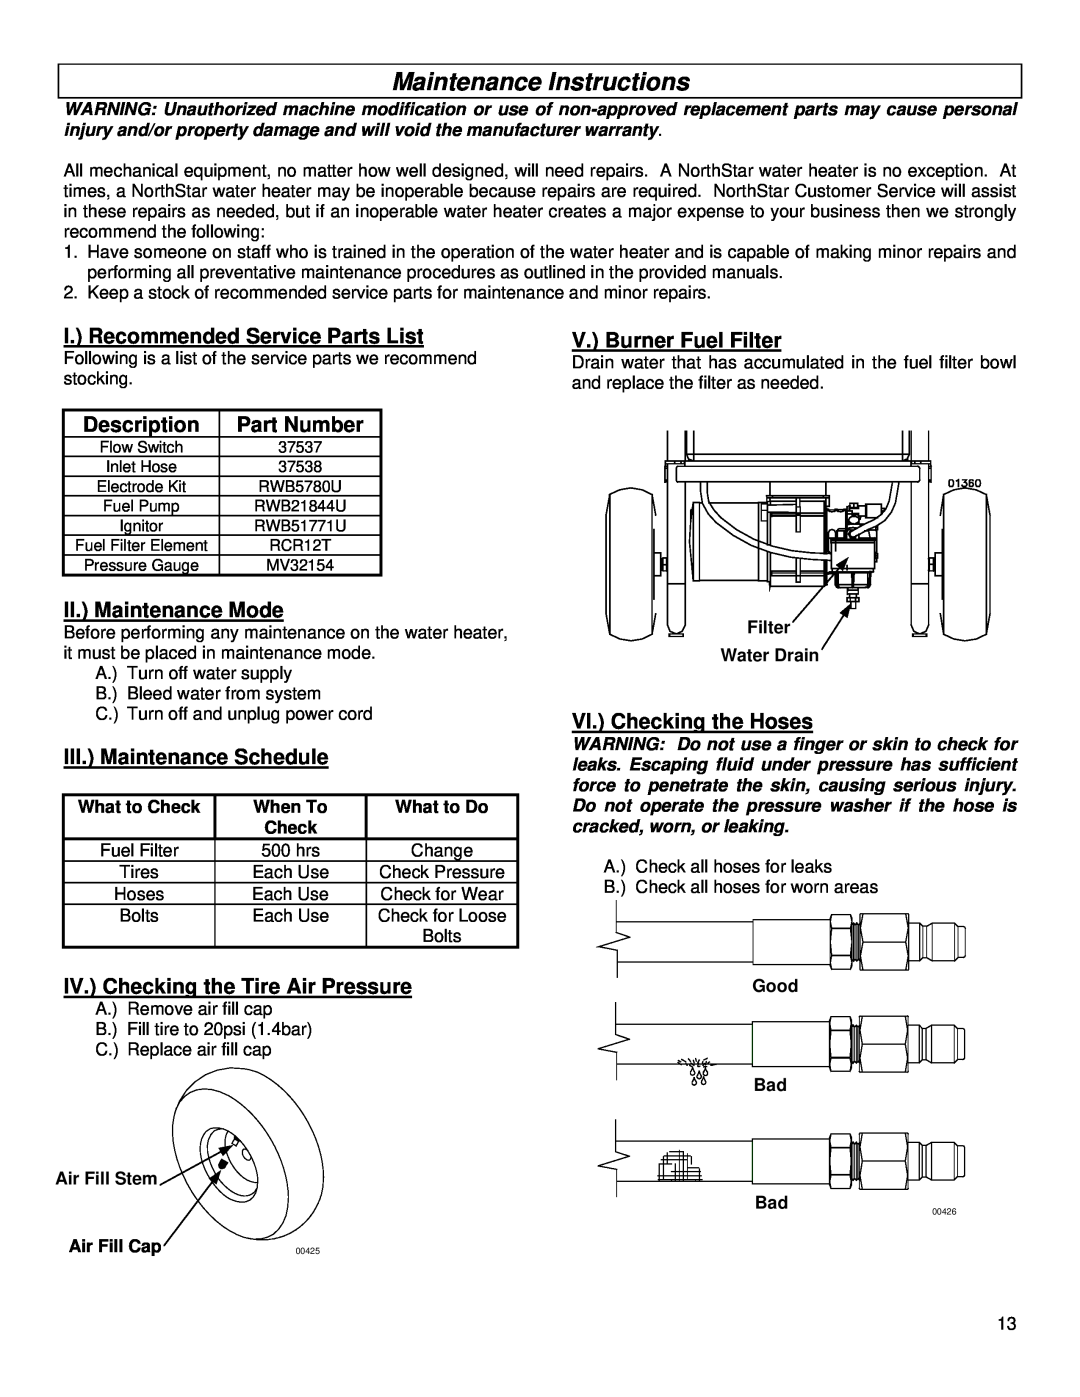 Northern Industrial Tools 157494 Maintenance Instructions, I. Recommended Service Parts List, Description, Part Number 